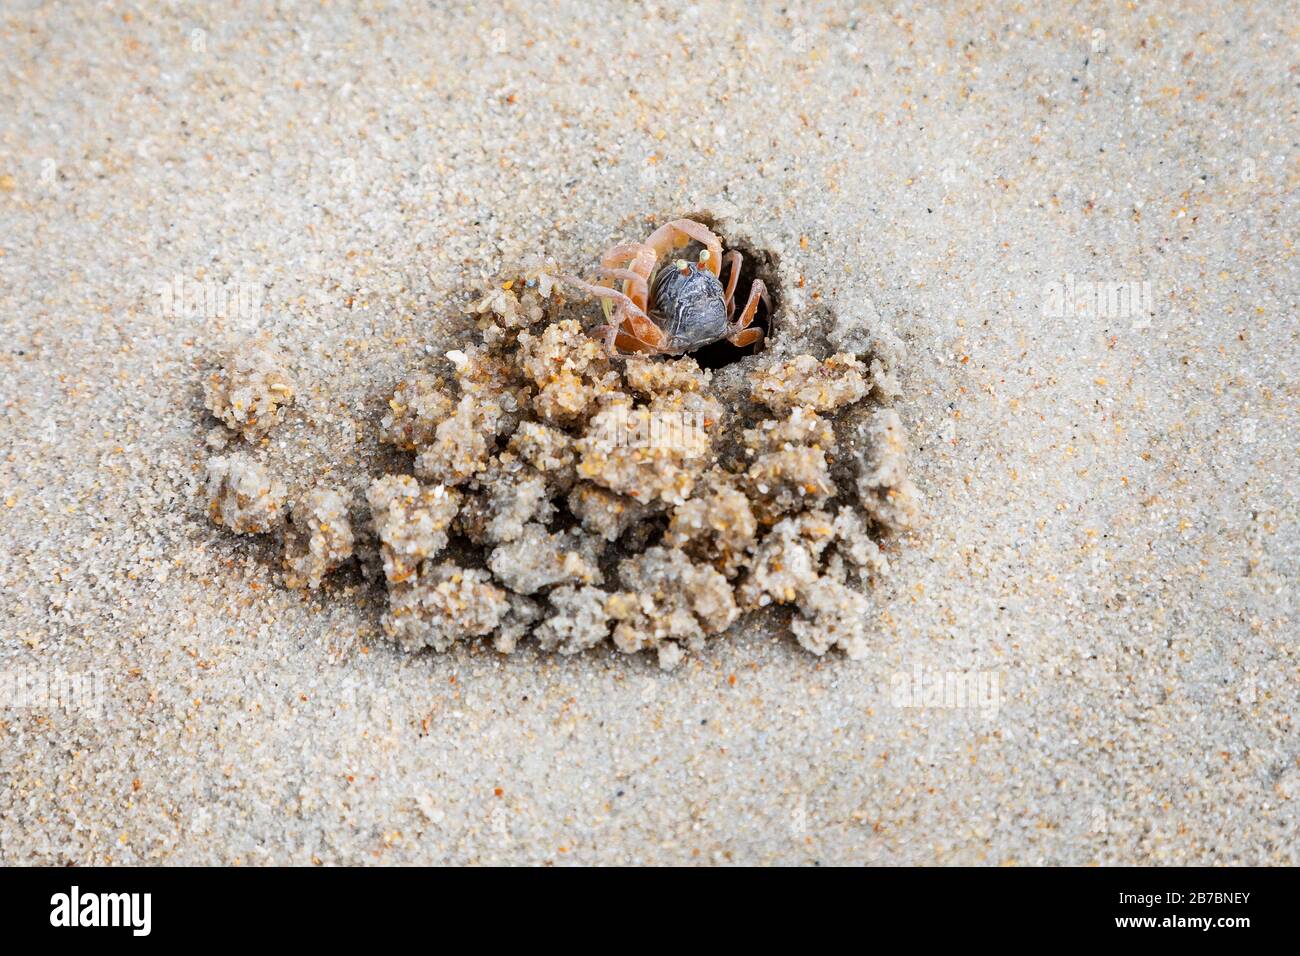 Sand Bubbler crab in burrow and with the feeding sand balls, in the indo-pacific beach at Andaman beach, Langkawi, Malaysia, Asia. Stock Photo